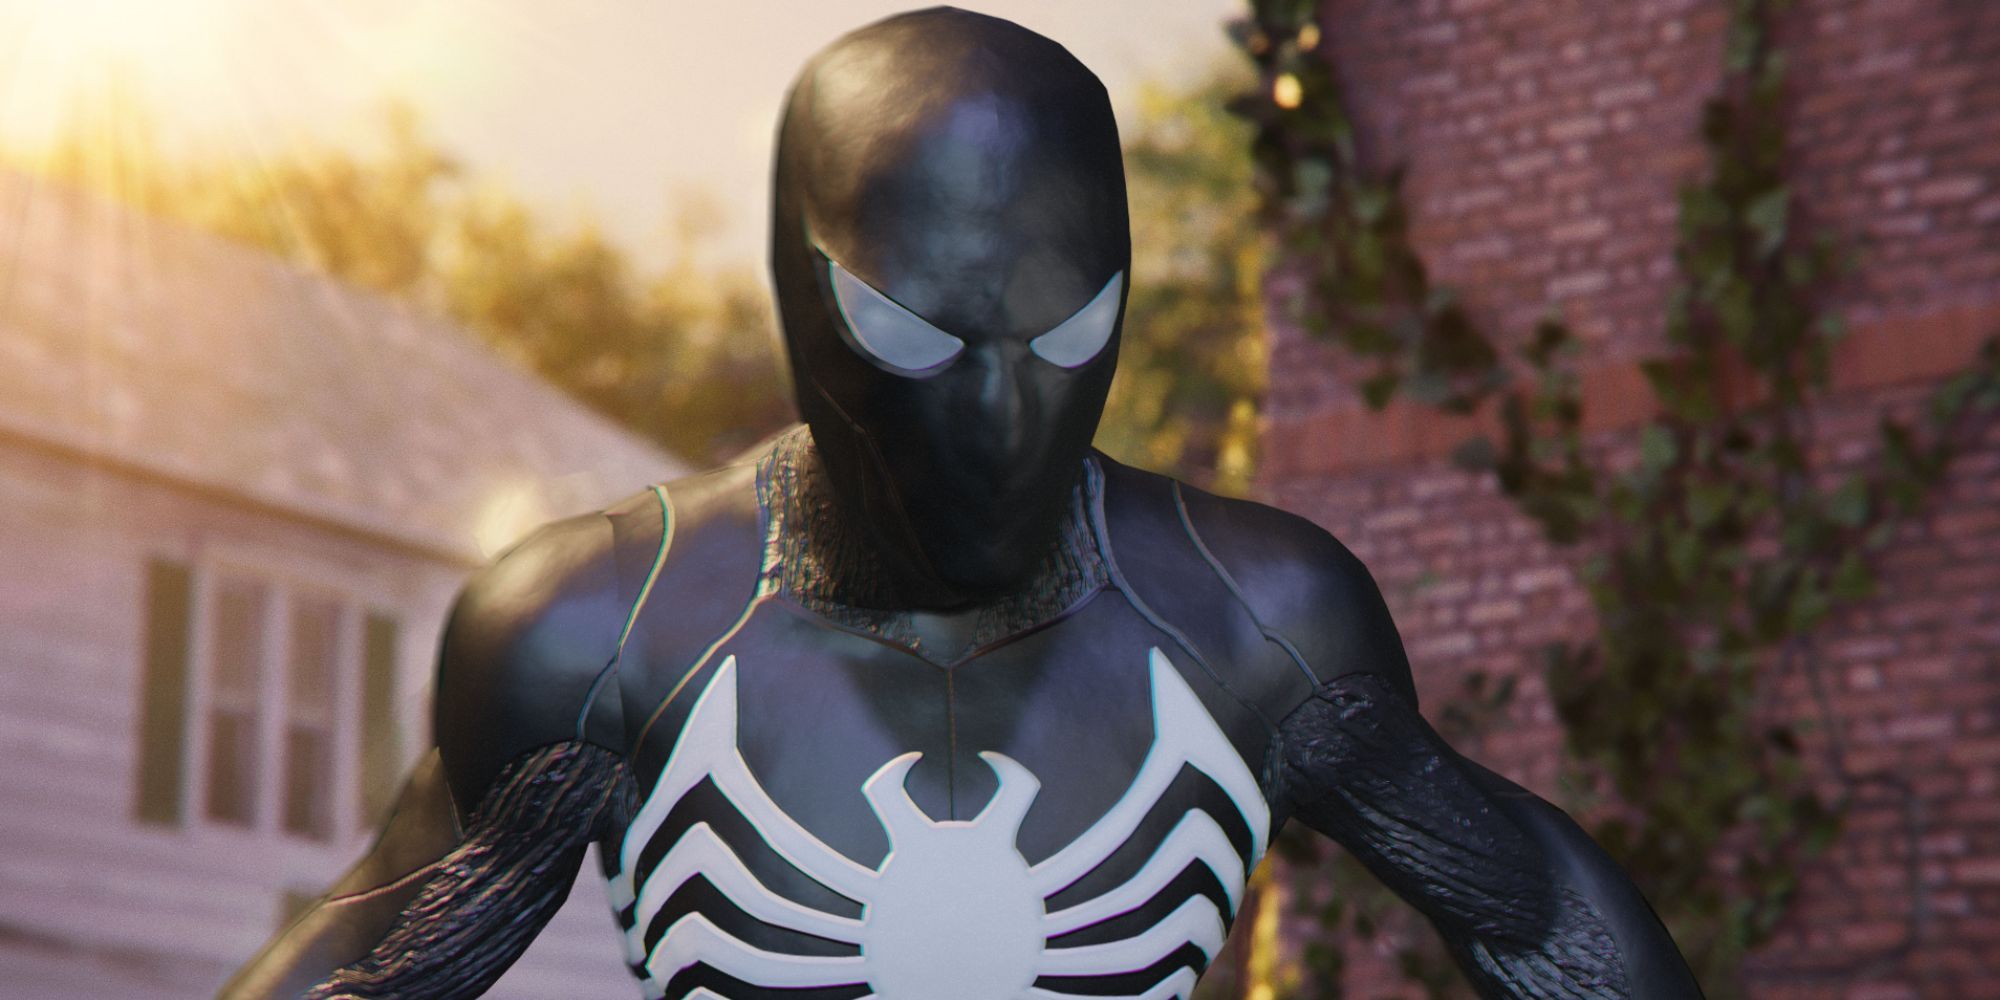 Spider-Man Web of Shadows - PS4 and Symbiote suit mod. Can't wait